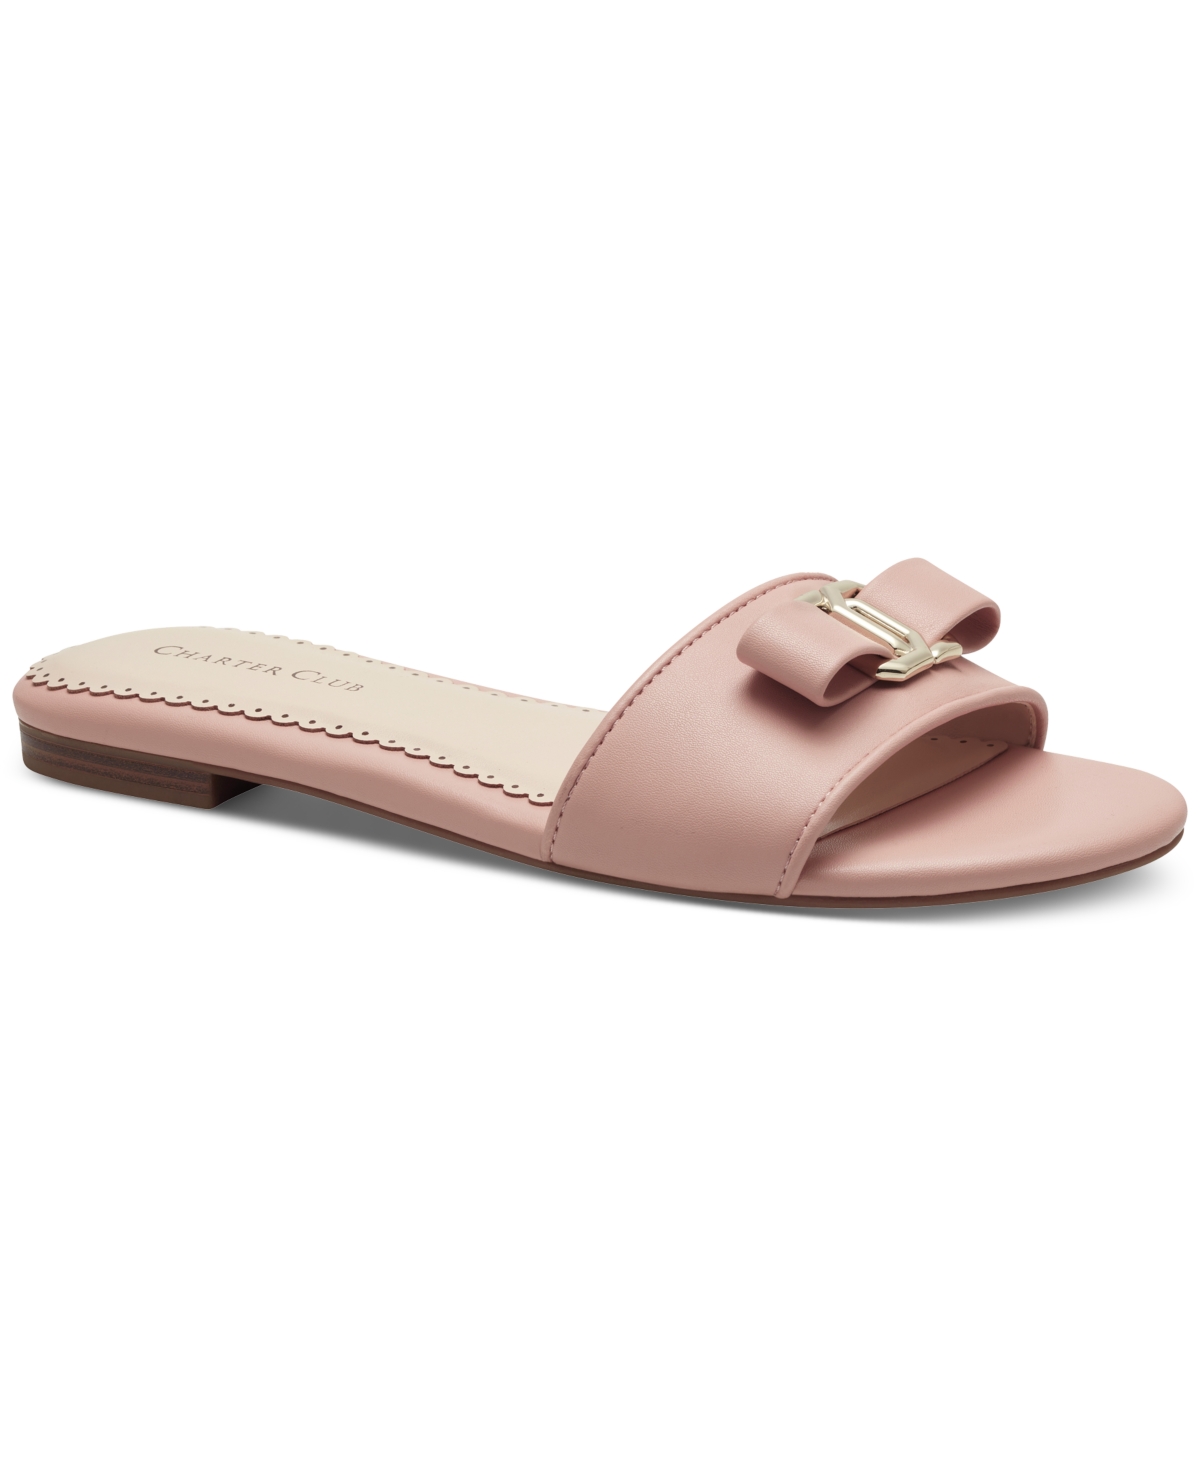 Charter Club Skyla Slip-On Bow Flat Sandals, Created for Macy's Women's Shoes